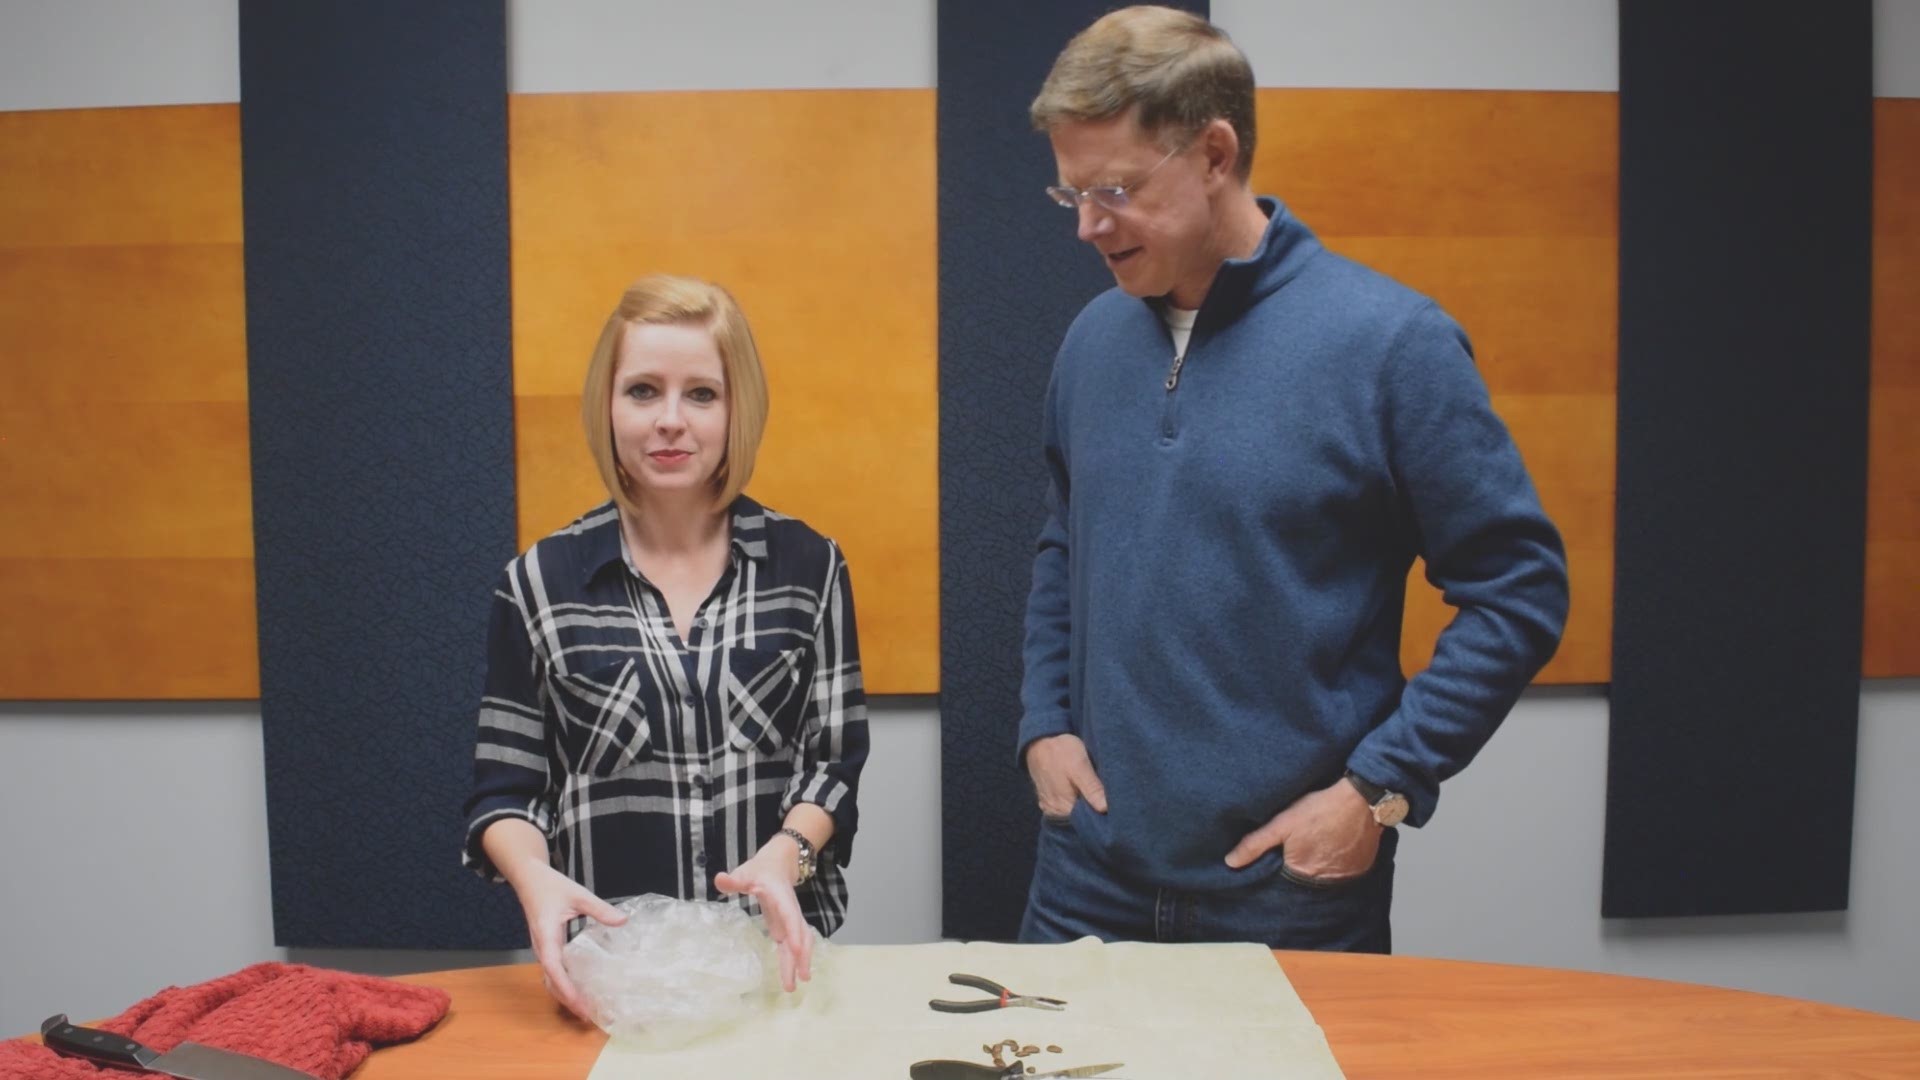 According to lore, the kitchen utensil shape found in a persimmon seed stem can predict winter weather. Cassie Nall and Todd Howell put that to the test.